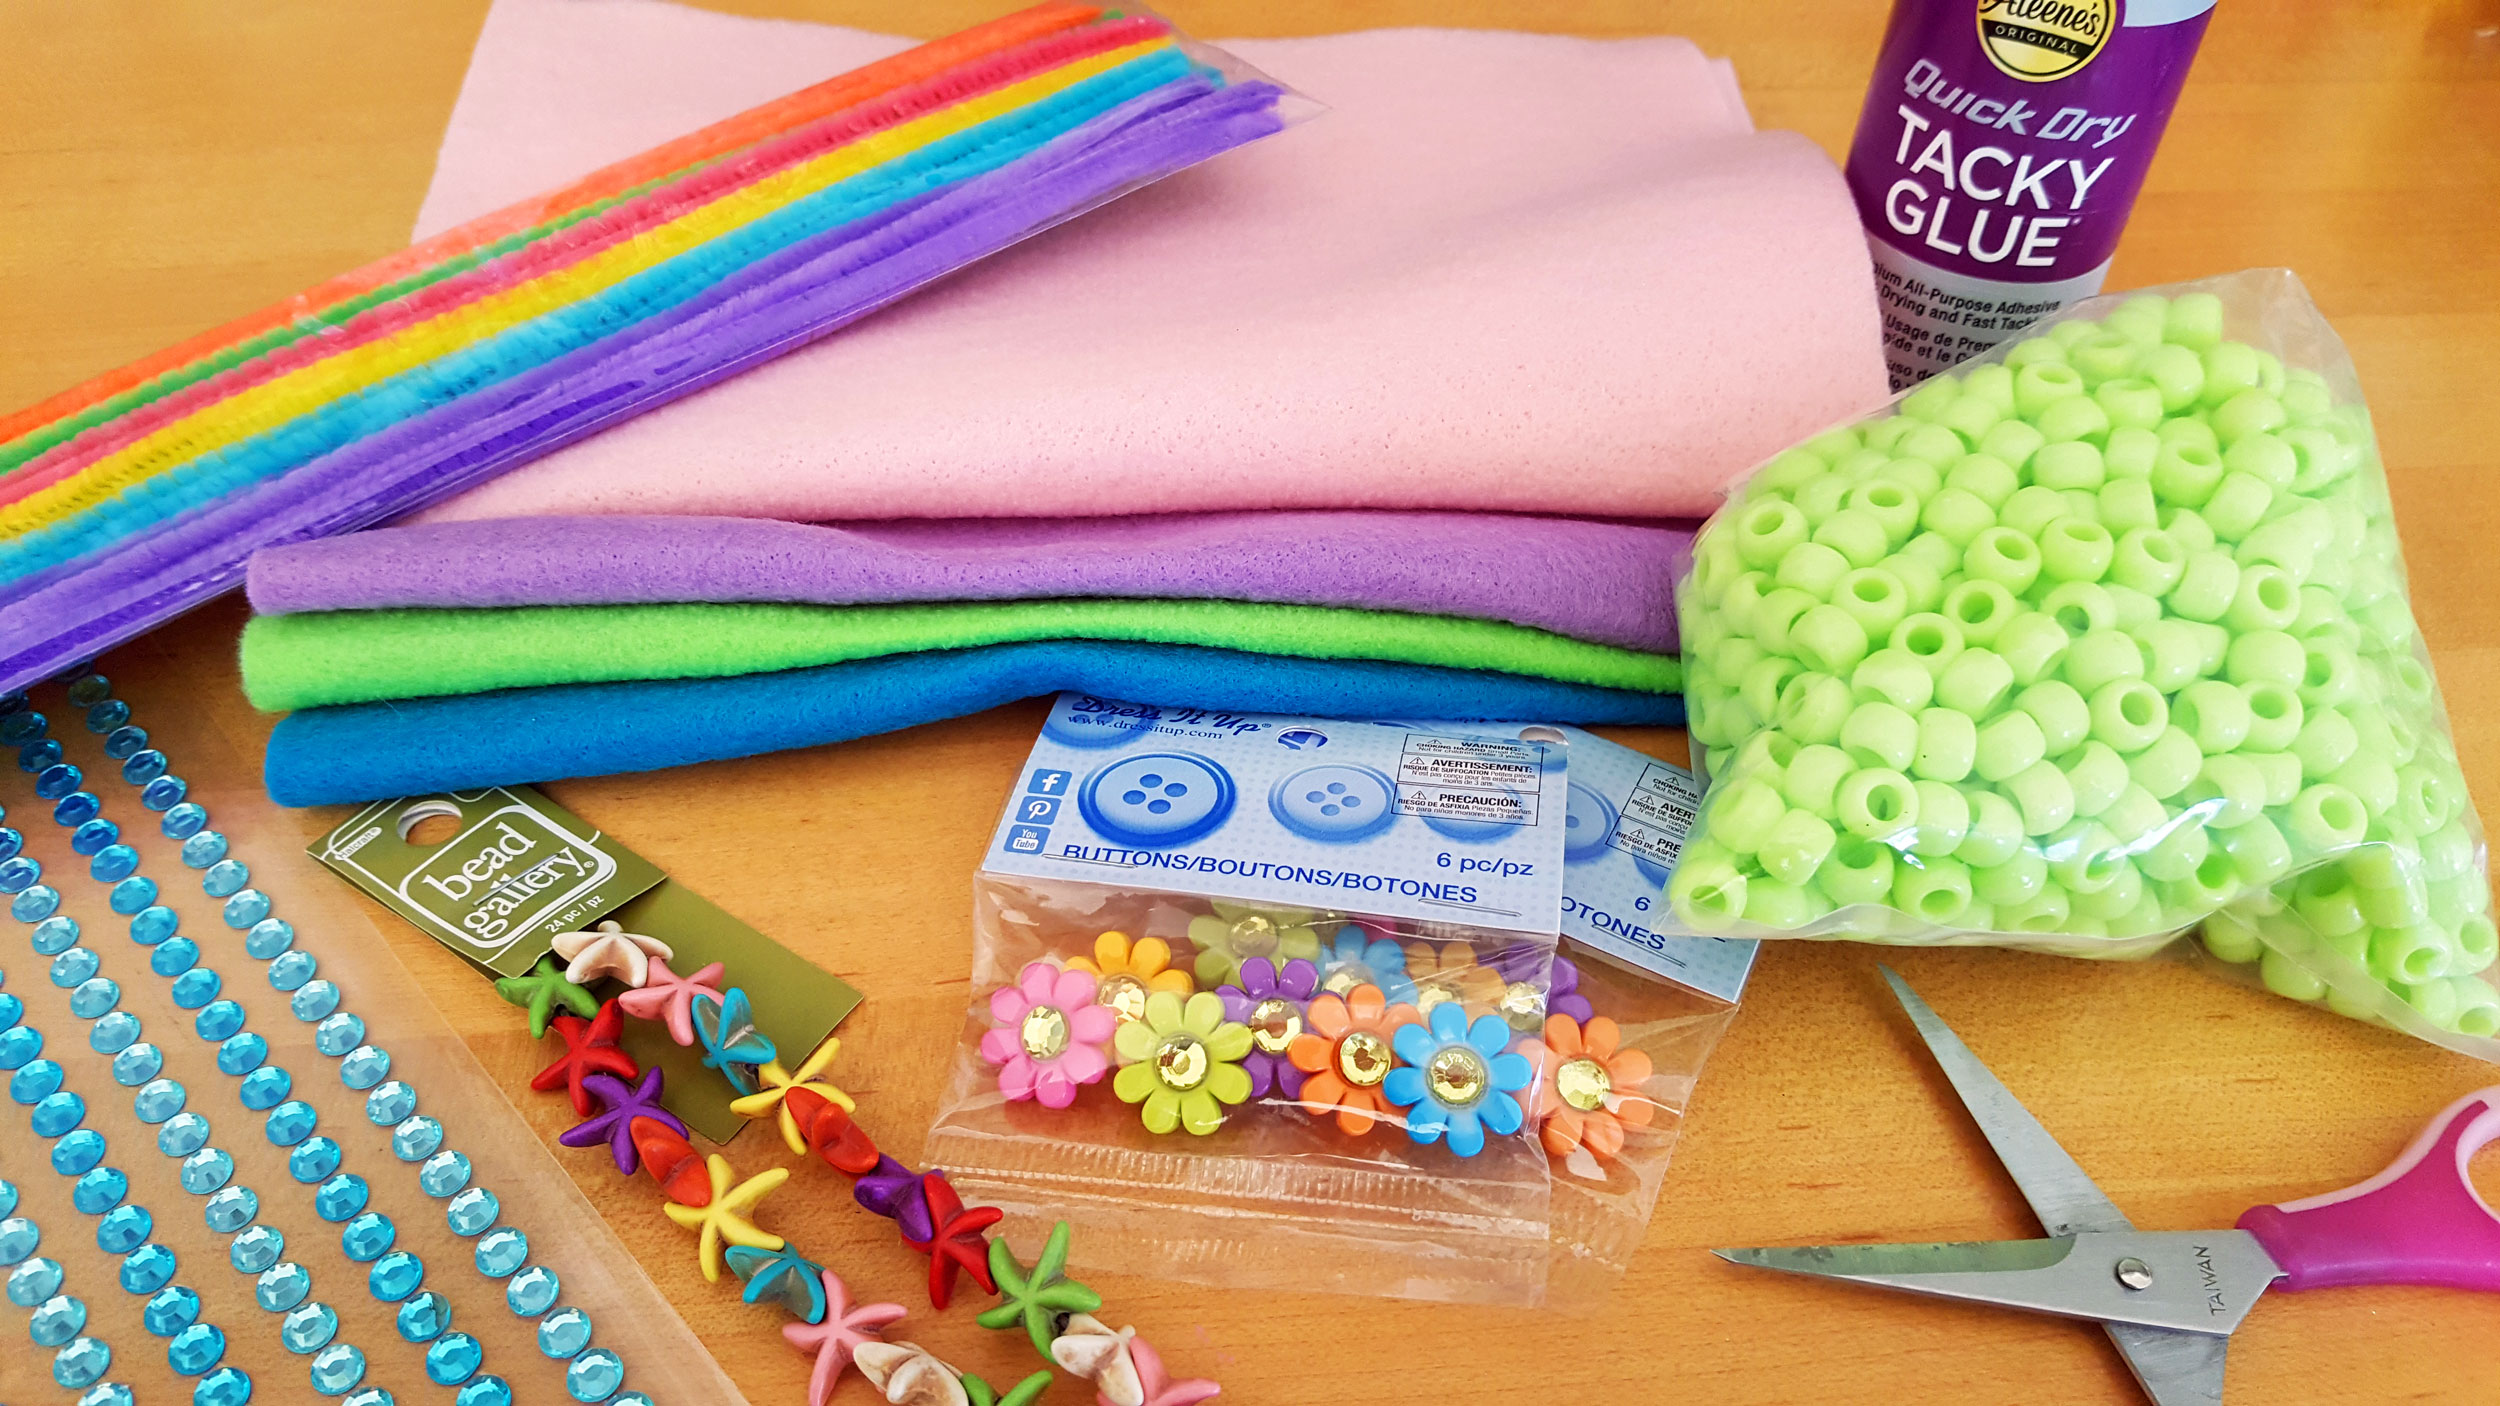 Supplies needed for craft, such as glue, beads, scissors, and felt on a table. | OrnamentShop.com